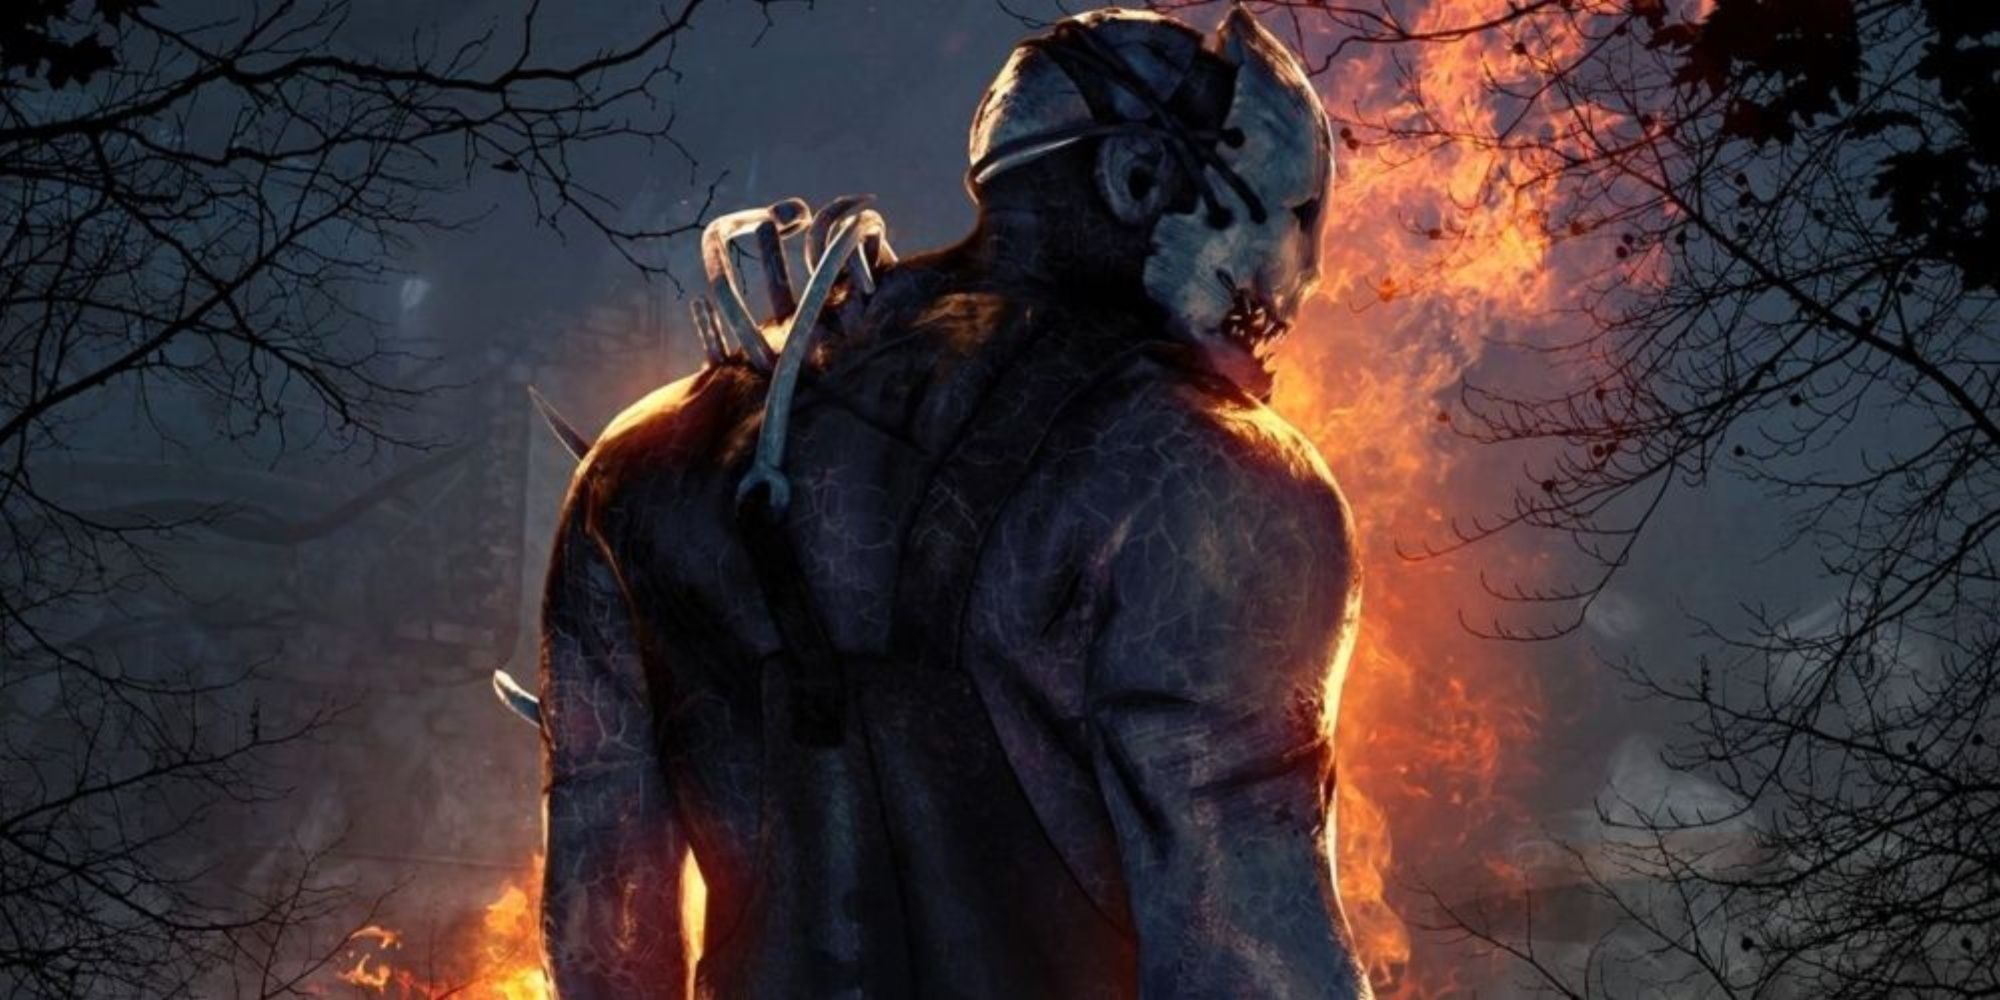 Dead By Daylight, The Trapper looking menacingly away from a burning area in the distance